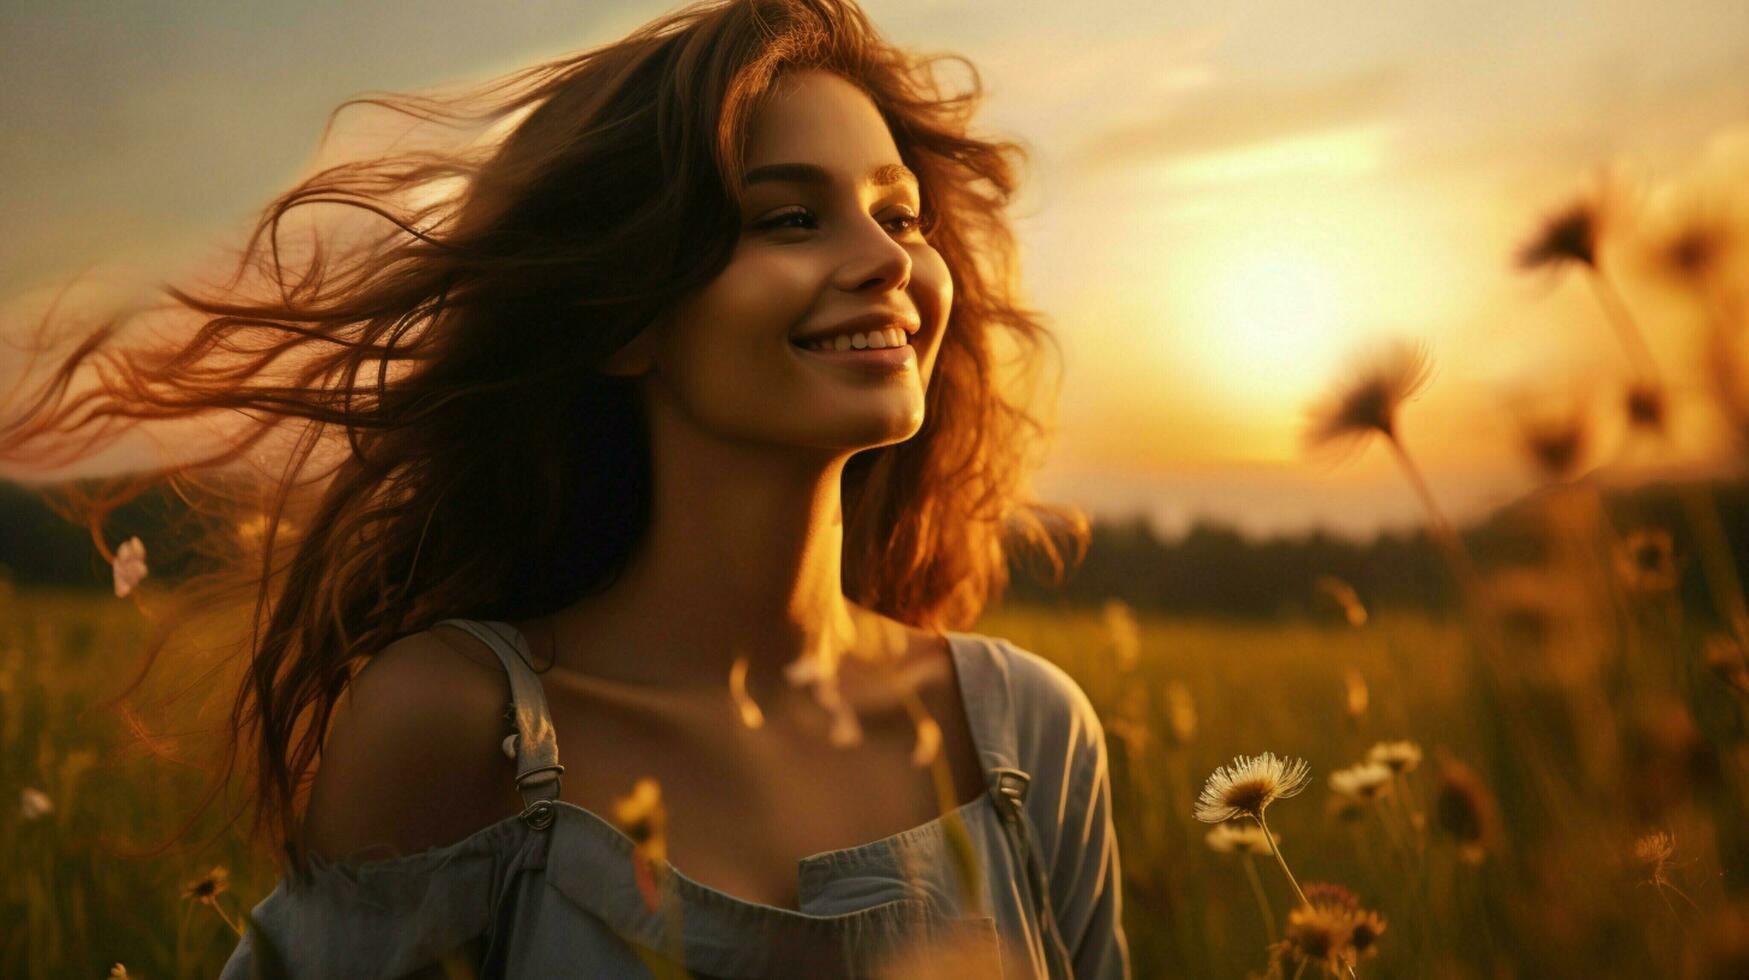 a young woman in a meadow smiling enjoying the sunset photo